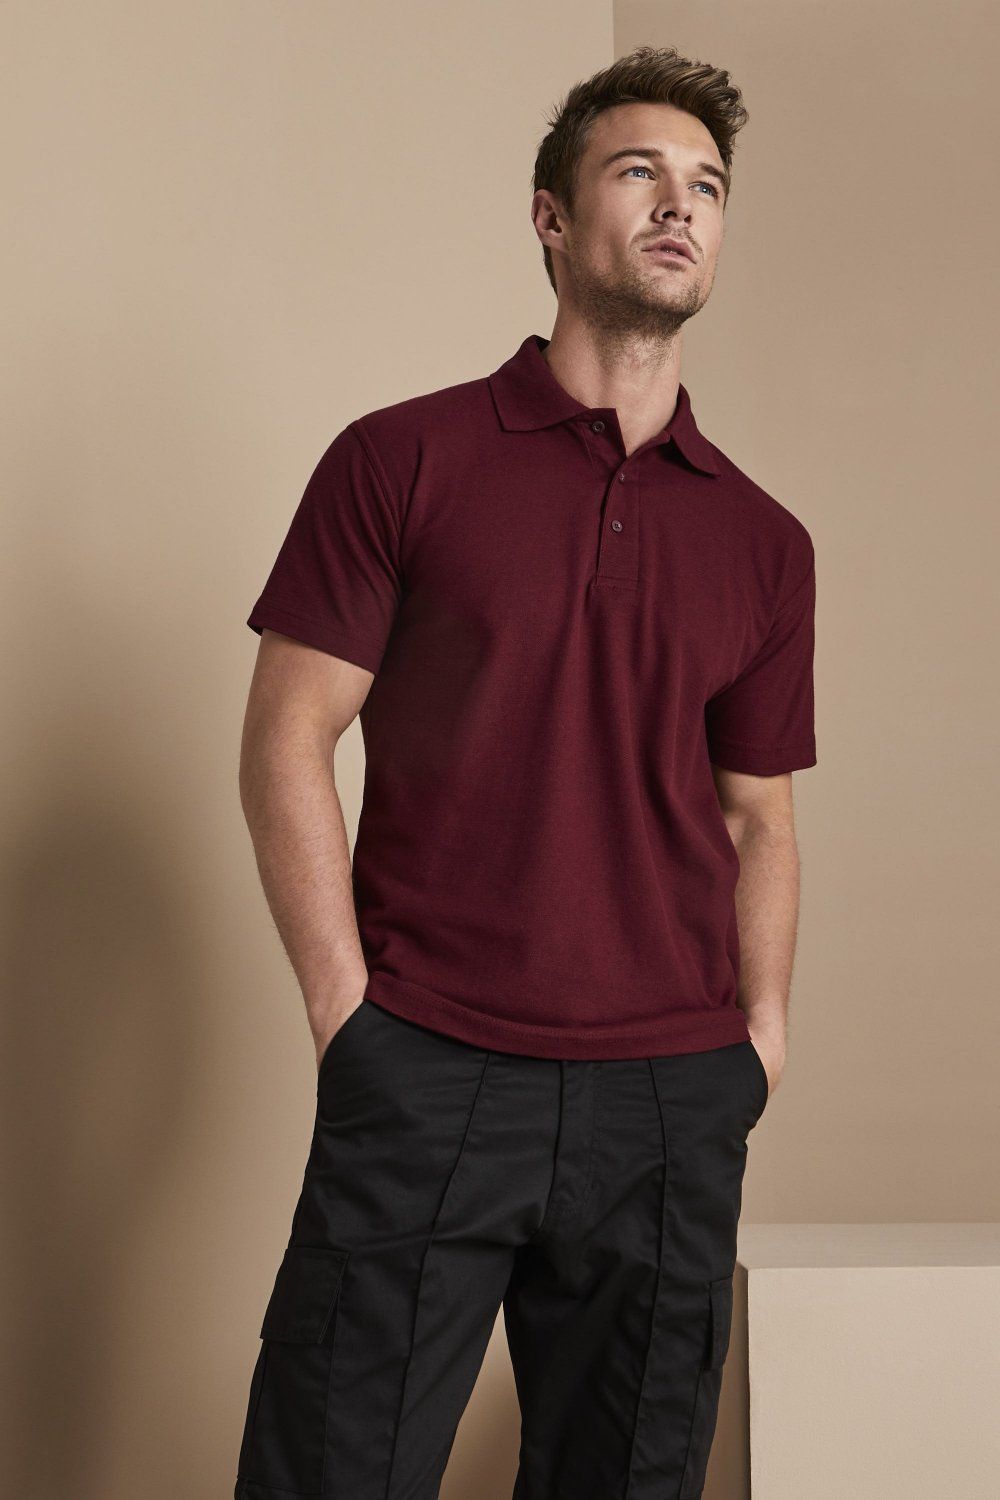 Best 15 Burgundy Polo Shirt Outfit Ideas: Ultimate Style Guide for Women